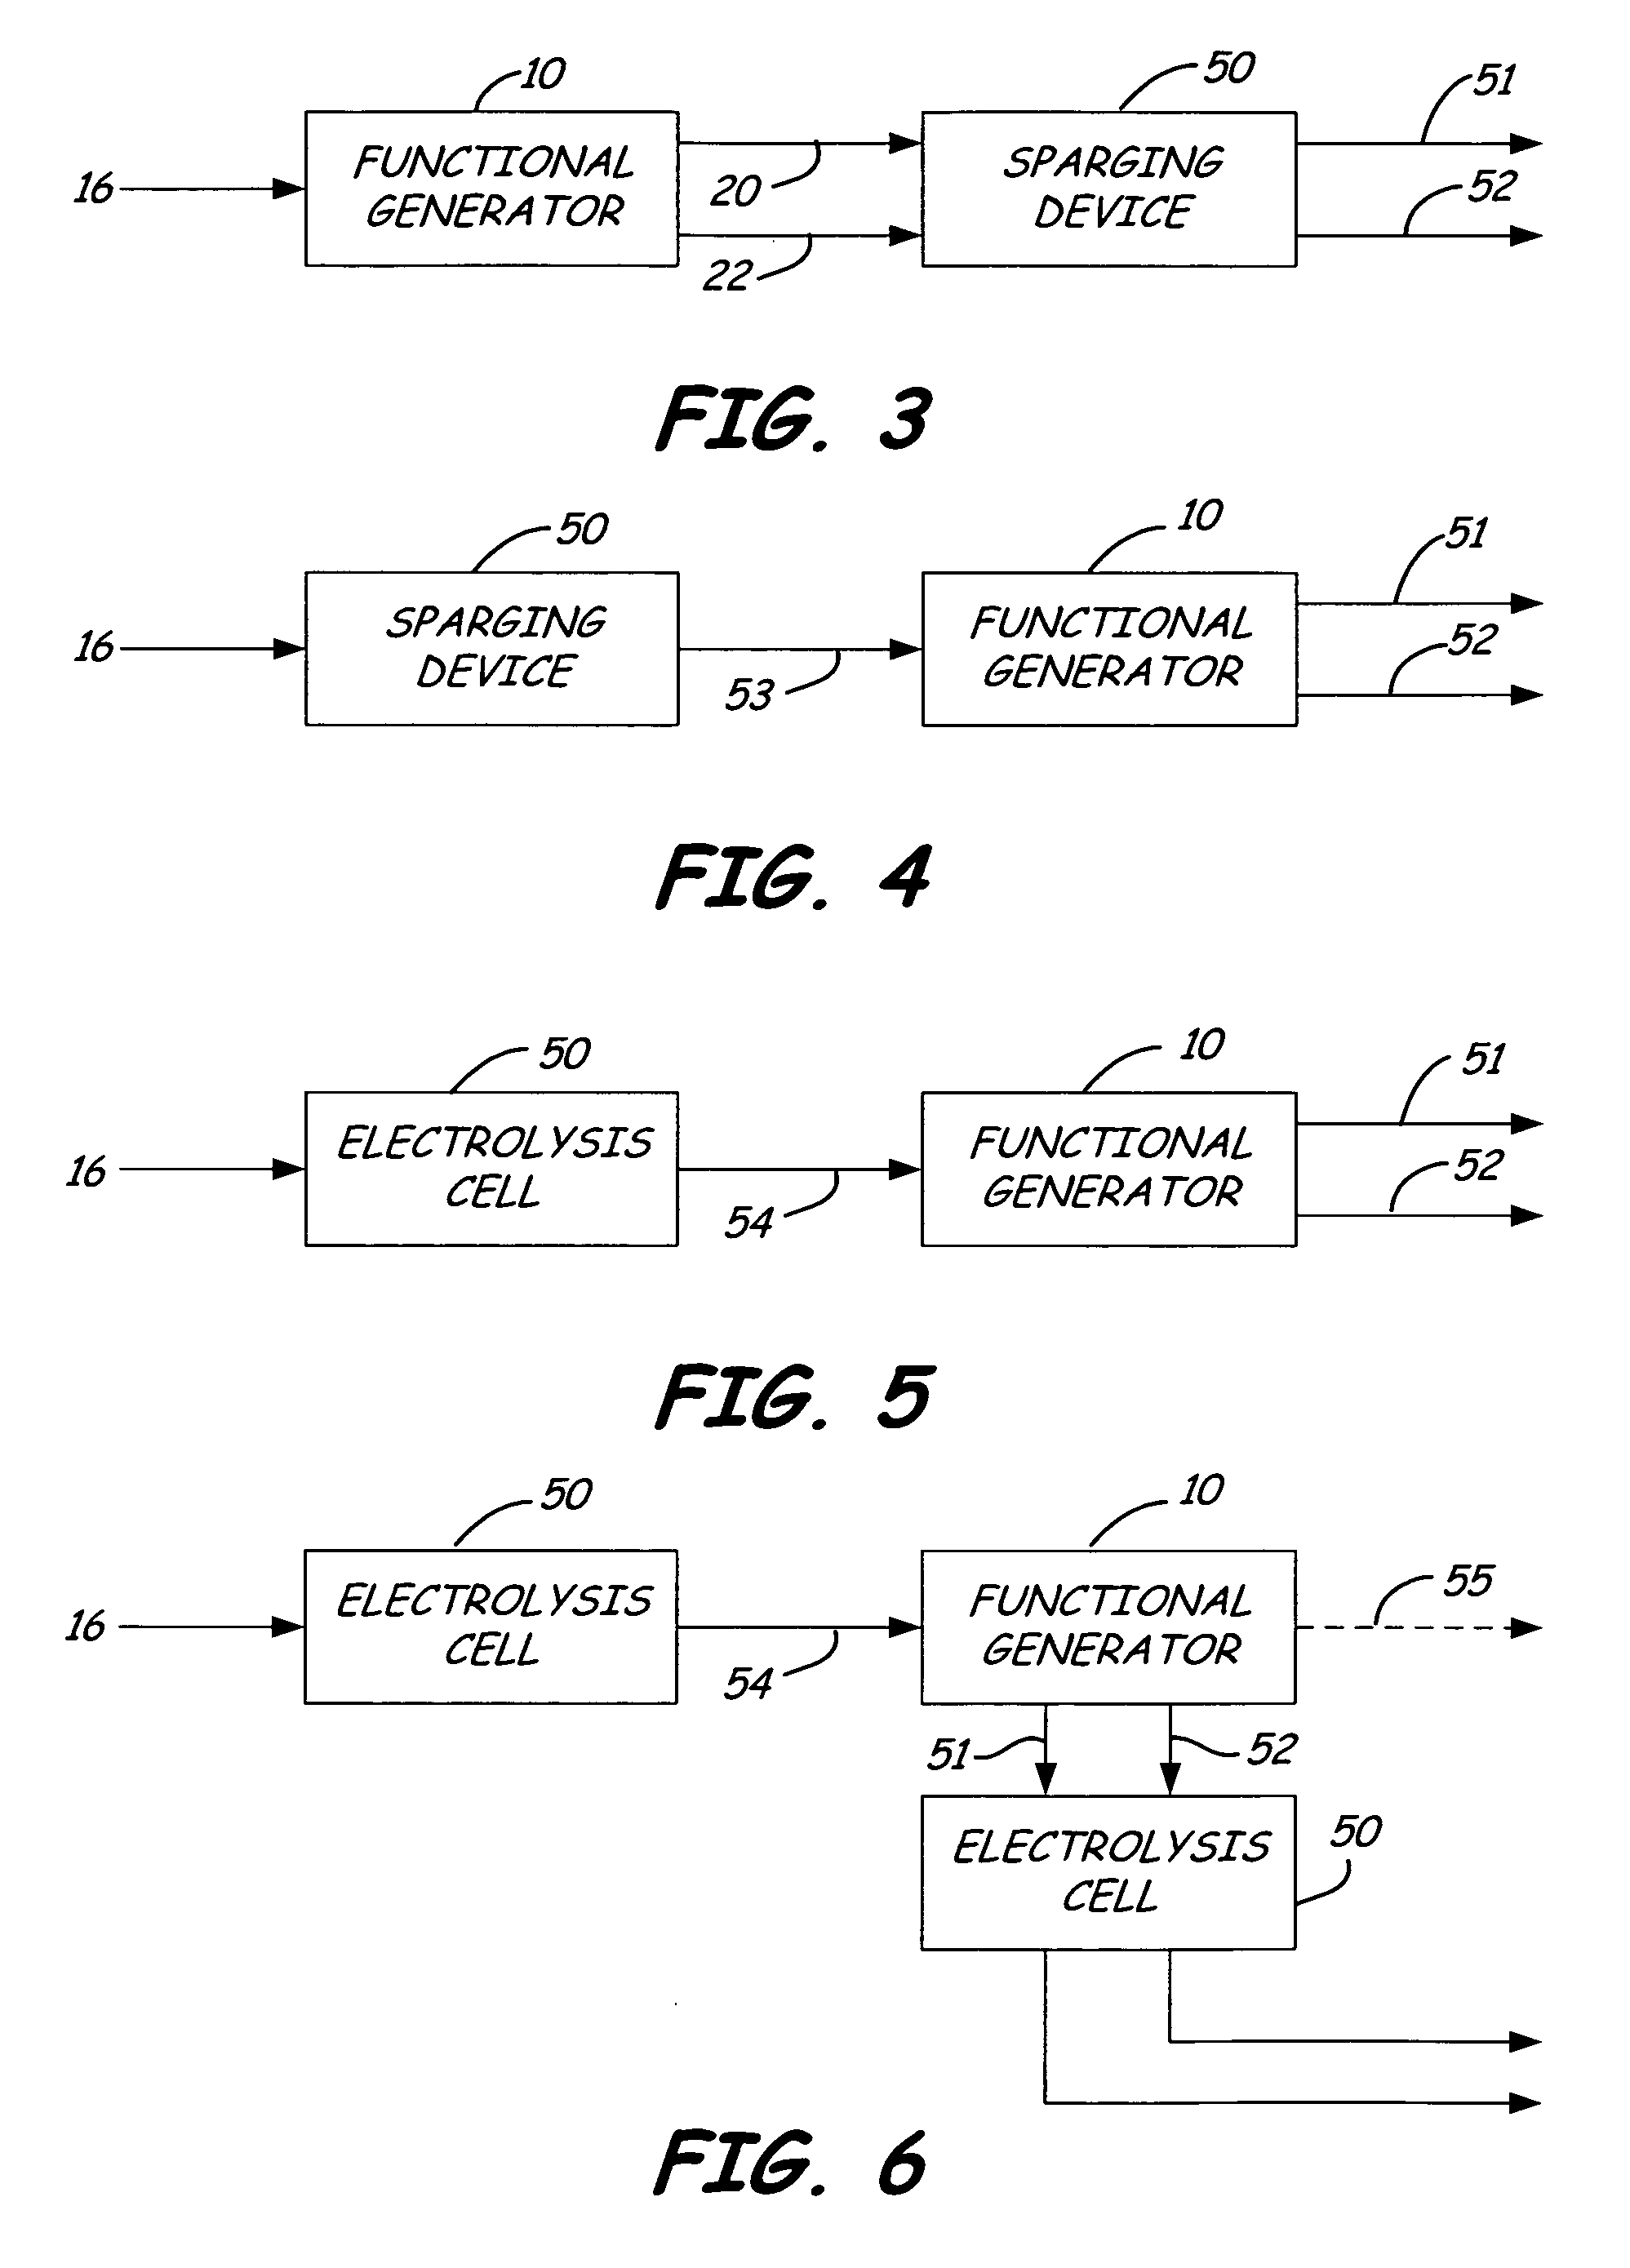 Cleaning apparatus having a functional generator for producing electrochemically activated cleaning liquid